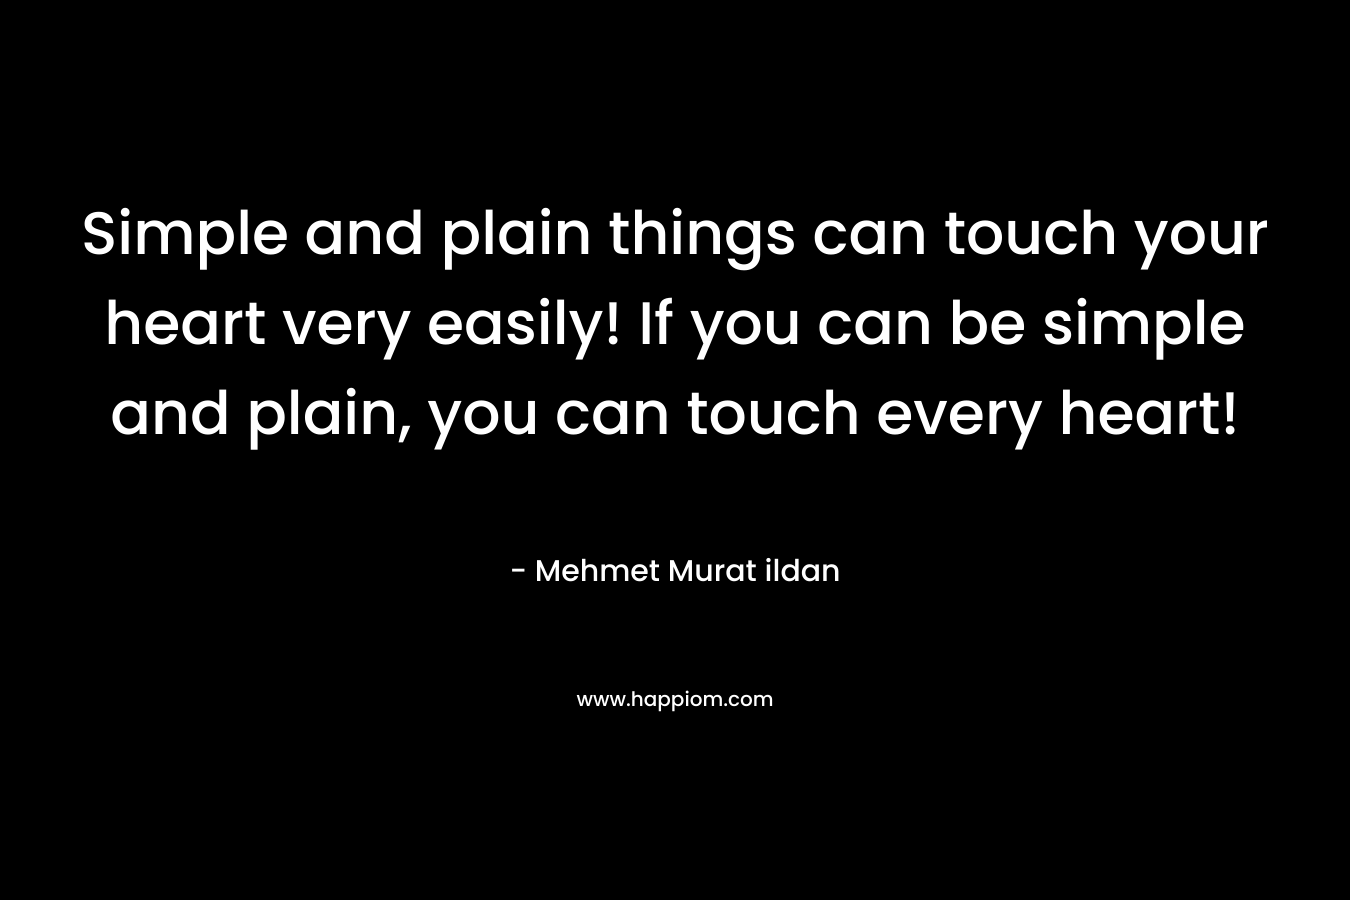 Simple and plain things can touch your heart very easily! If you can be simple and plain, you can touch every heart!